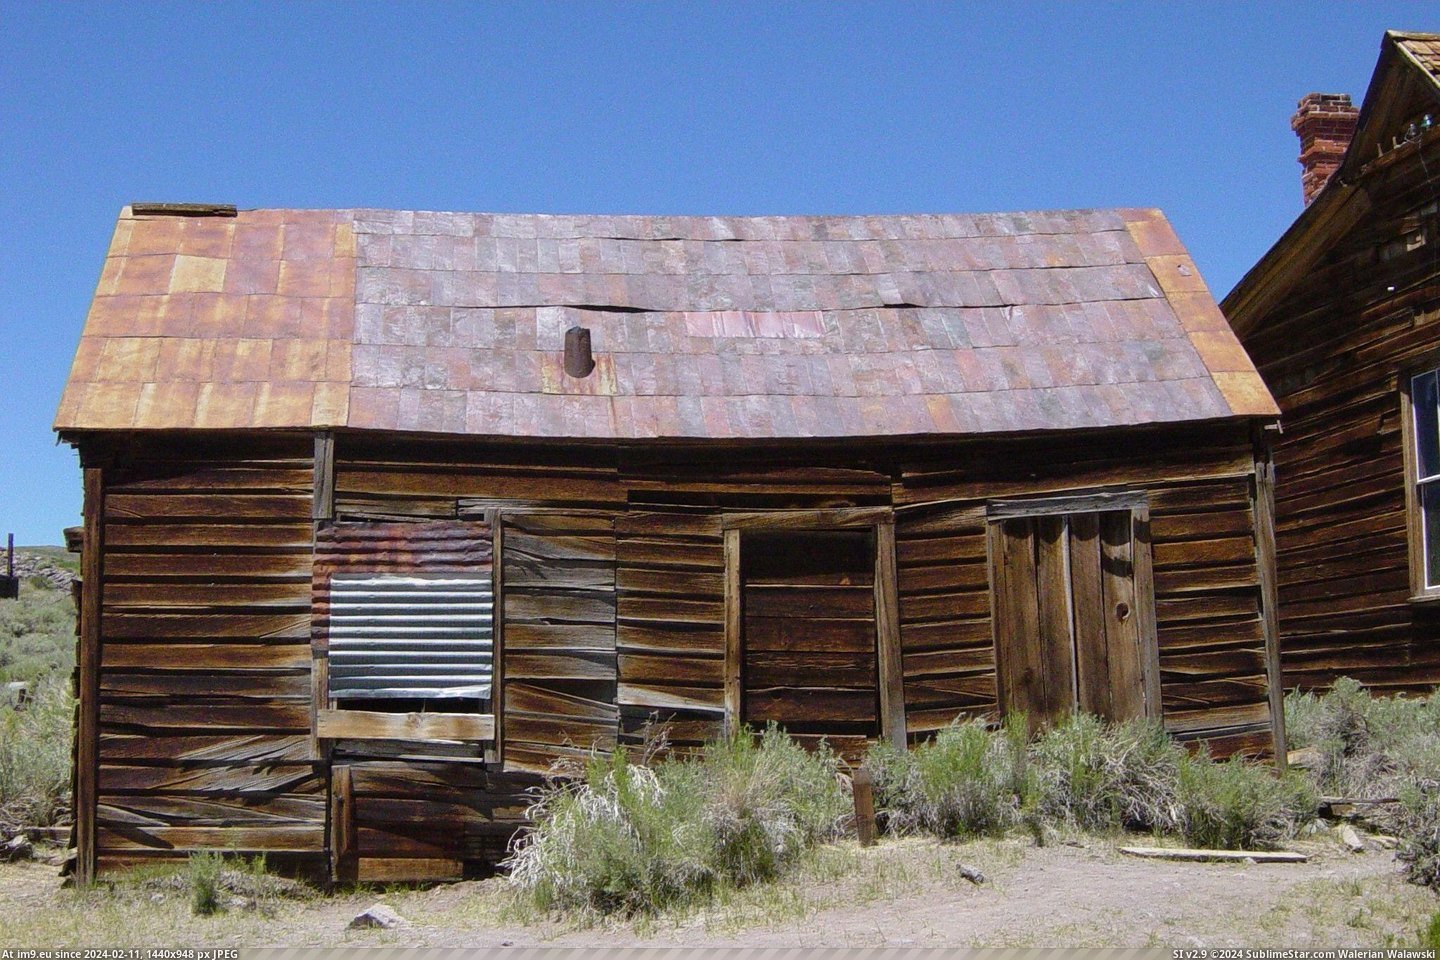 #California #Machine #Bodie #Shop #Bell Bell'S Machine Shop In Bodie, California Pic. (Изображение из альбом Bodie - a ghost town in Eastern California))